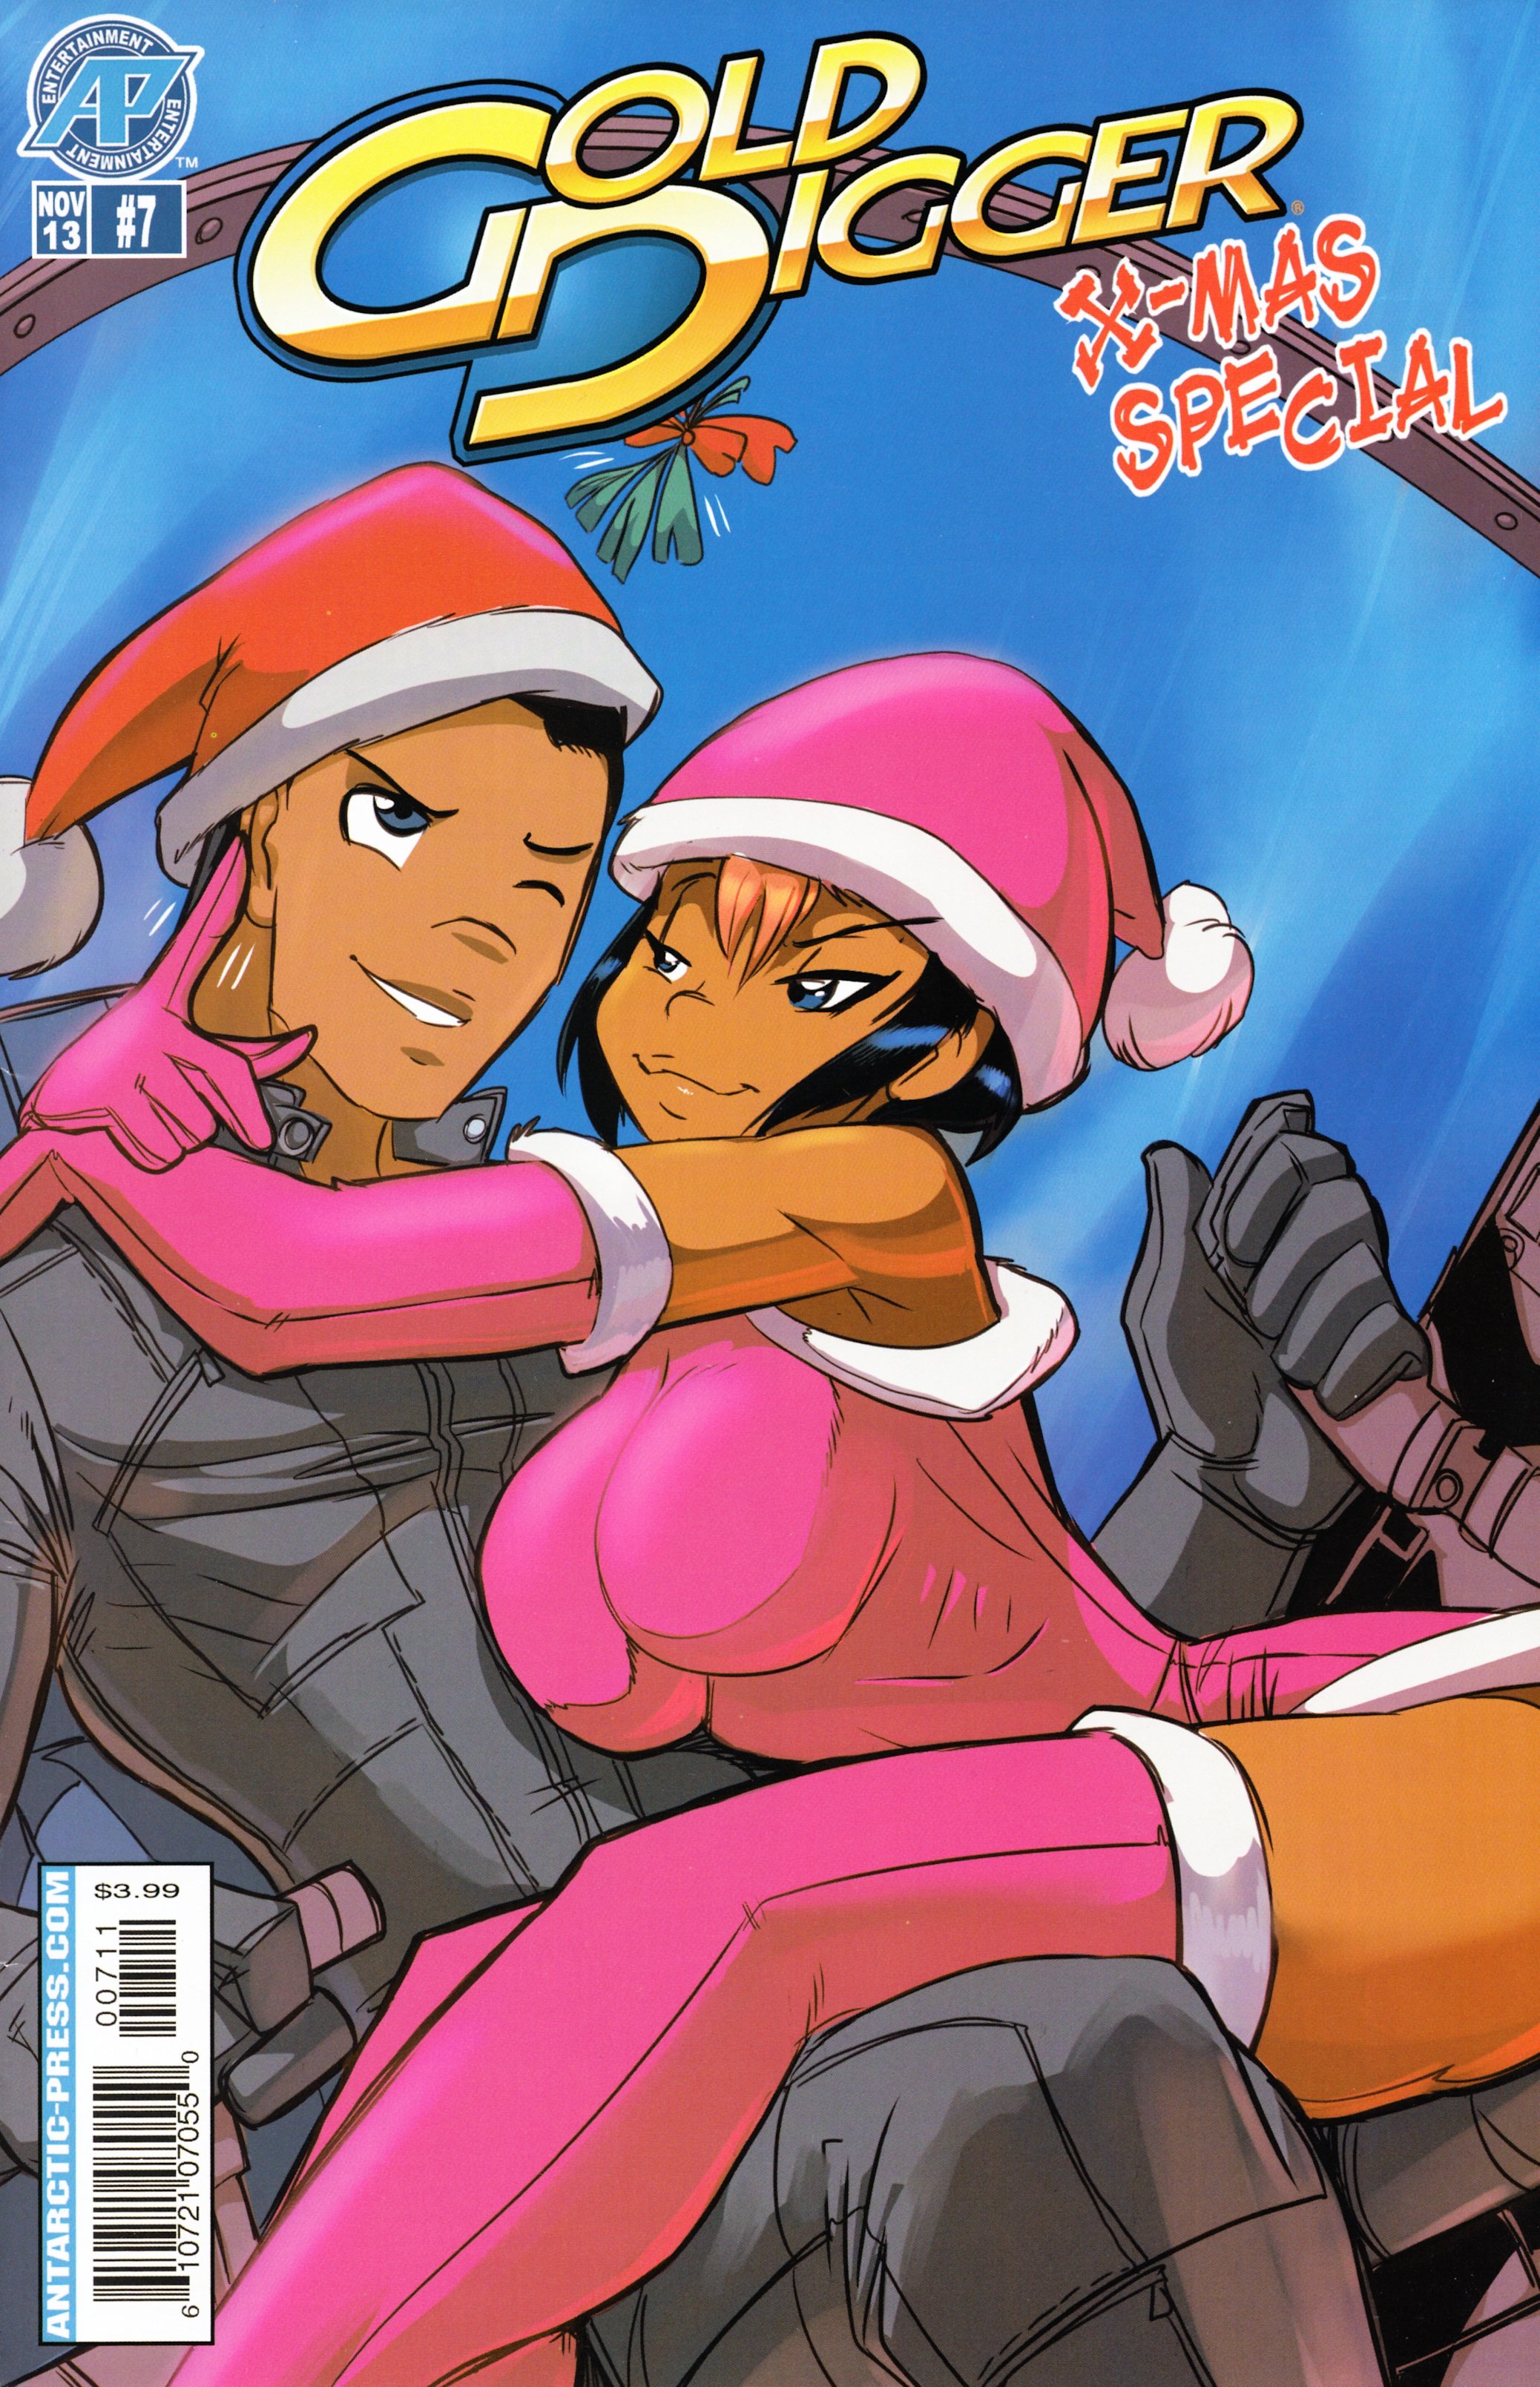 Read online Gold Digger X-Mas Special comic -  Issue #7 - 1